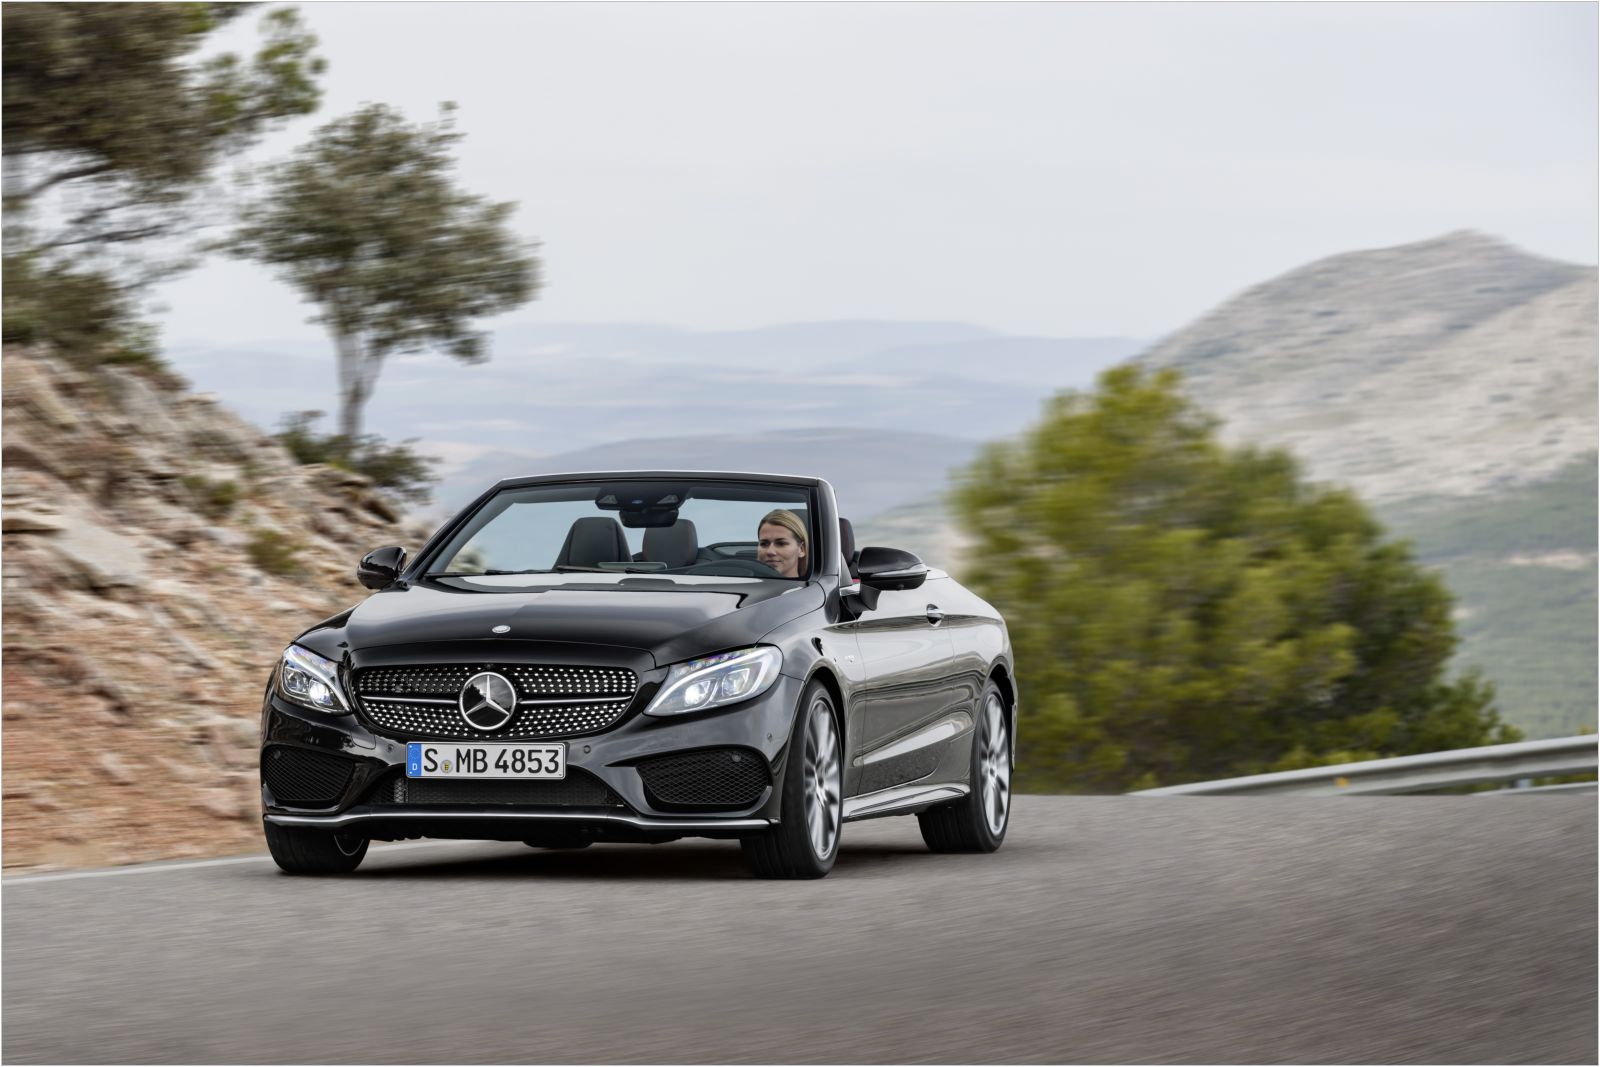 Mercedes-Benz C43 AMG 4Matic Cabriolet, 1600x1067px, img-4